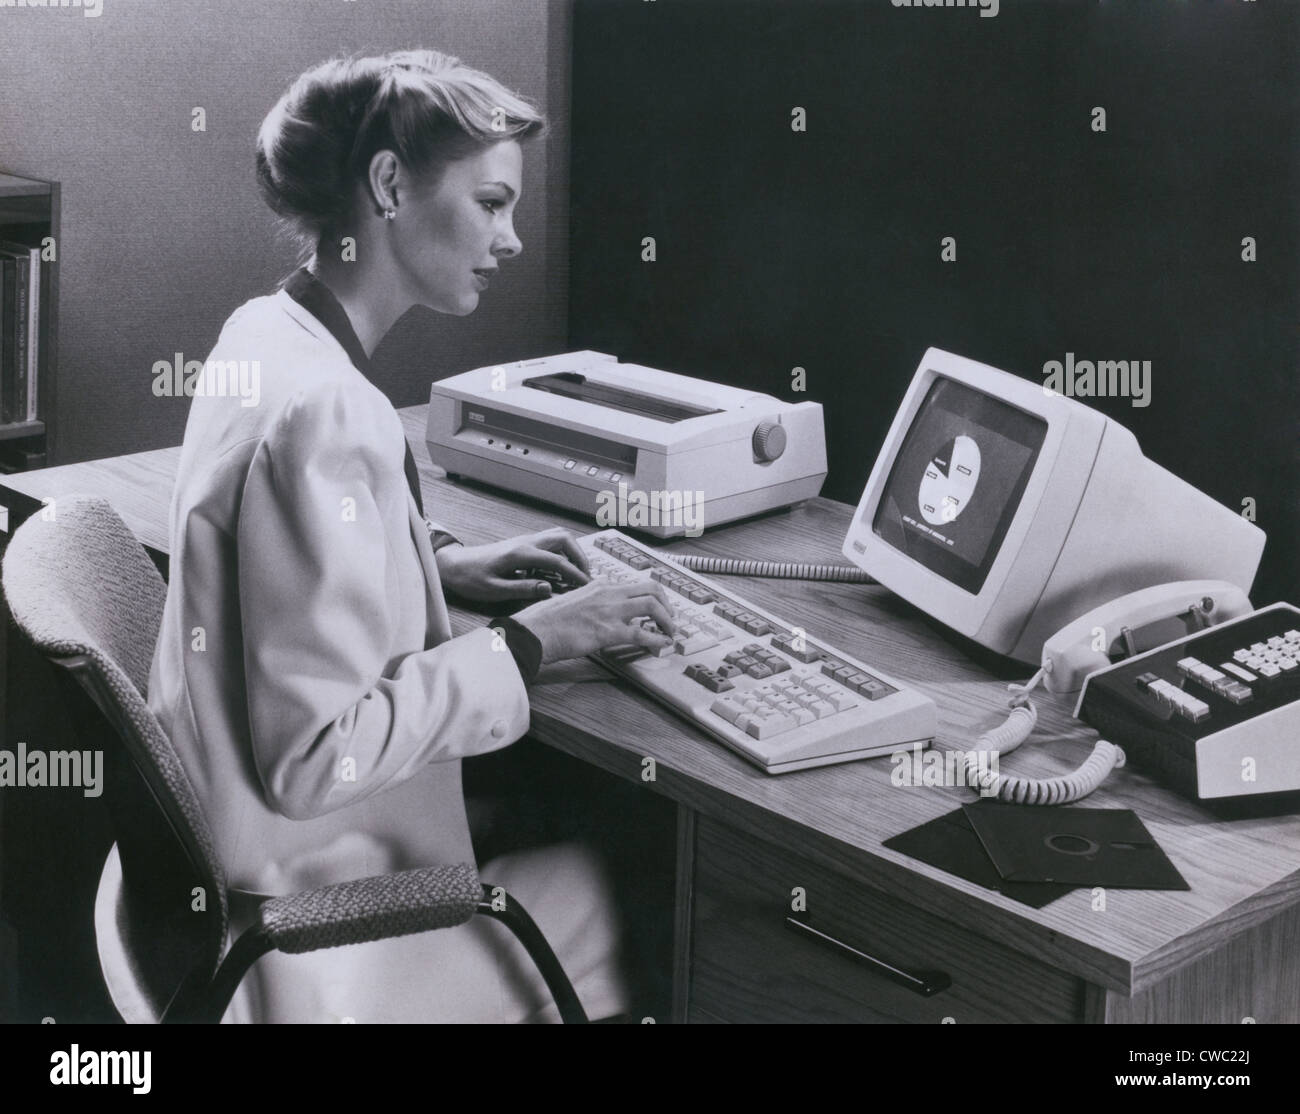 Women using and early personal computer made by the Digital Equipment Corporation of Maynard Massachusetts in 1982. The Stock Photo